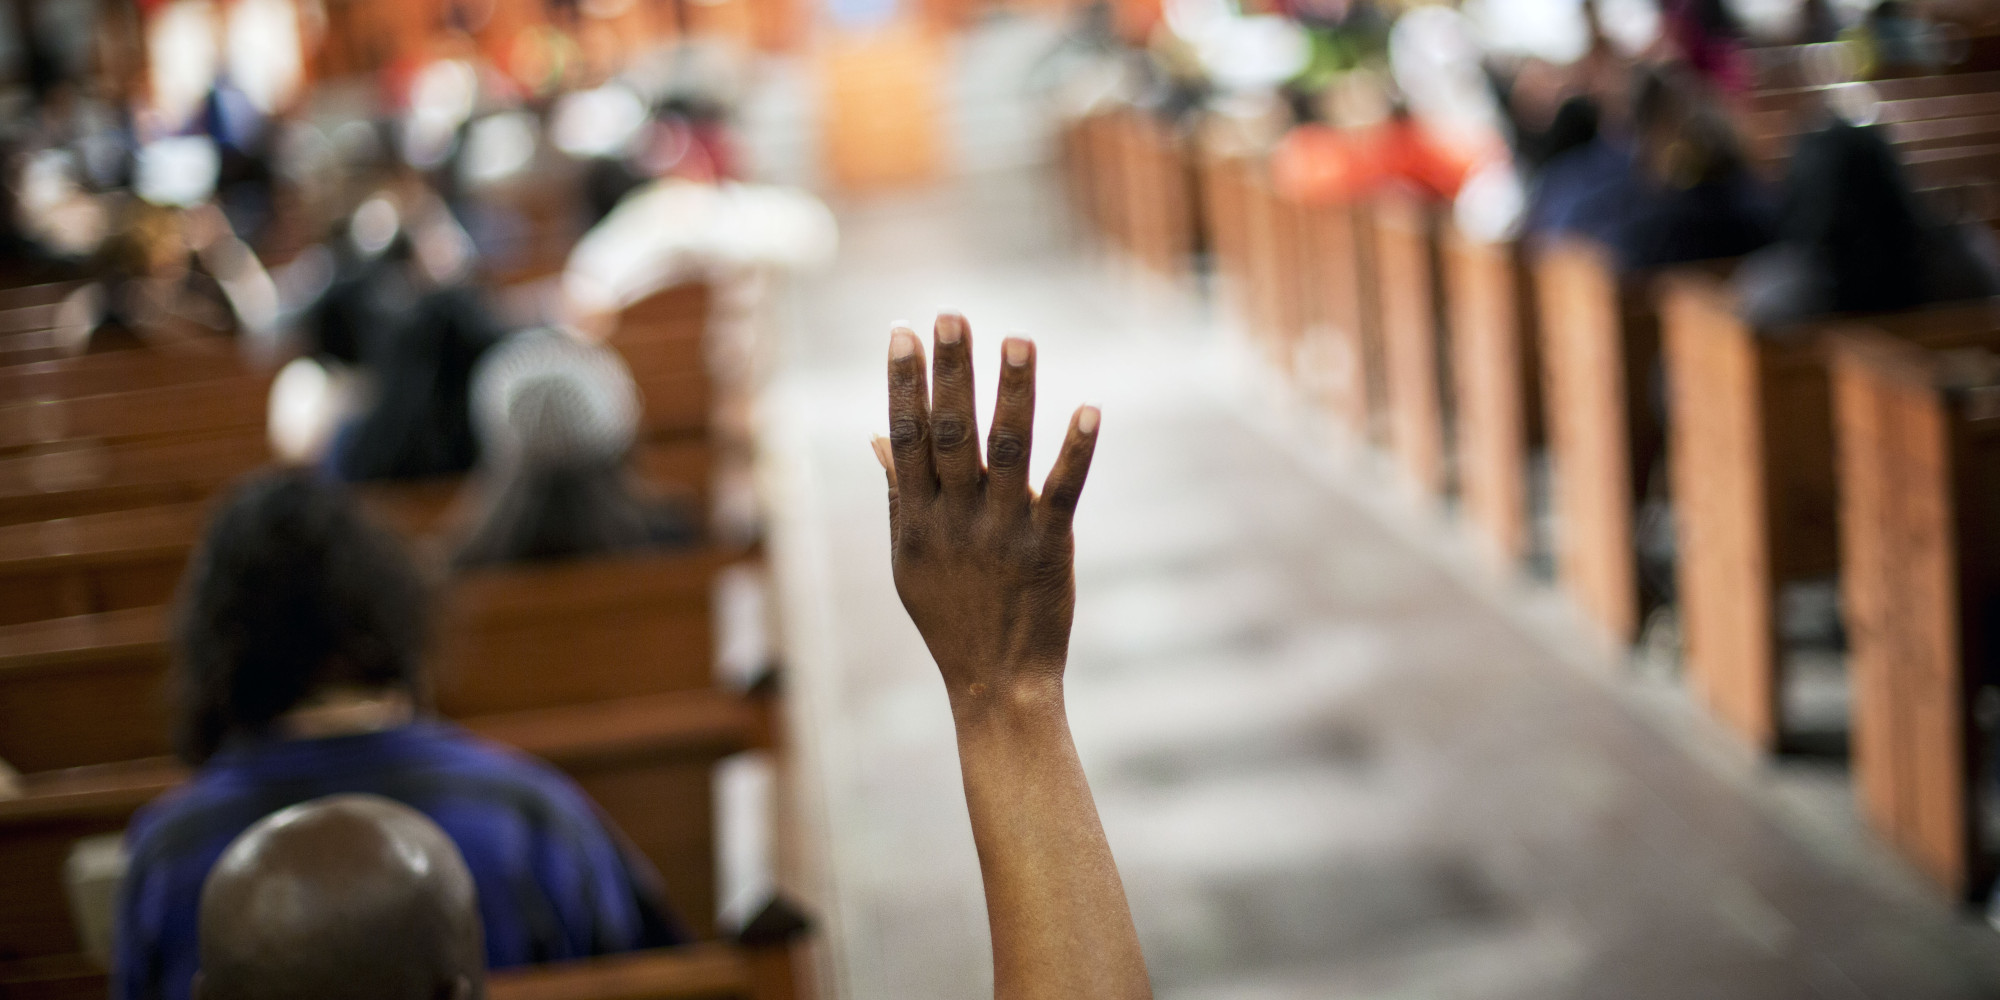 Morma Francis, of Atlanta, raises her hand to ask a question during a community town hall forum at Ebenezer Baptist Church, the church where The Rev. Martin Luther King Jr. preached, Monday, Dec. 8, 2014, in Atlanta. Dozens of people met at the church to discuss recent cases of unarmed black men being fatally shot by police and ways to improve the way officers interact with the public.(AP Photo/David Goldman)